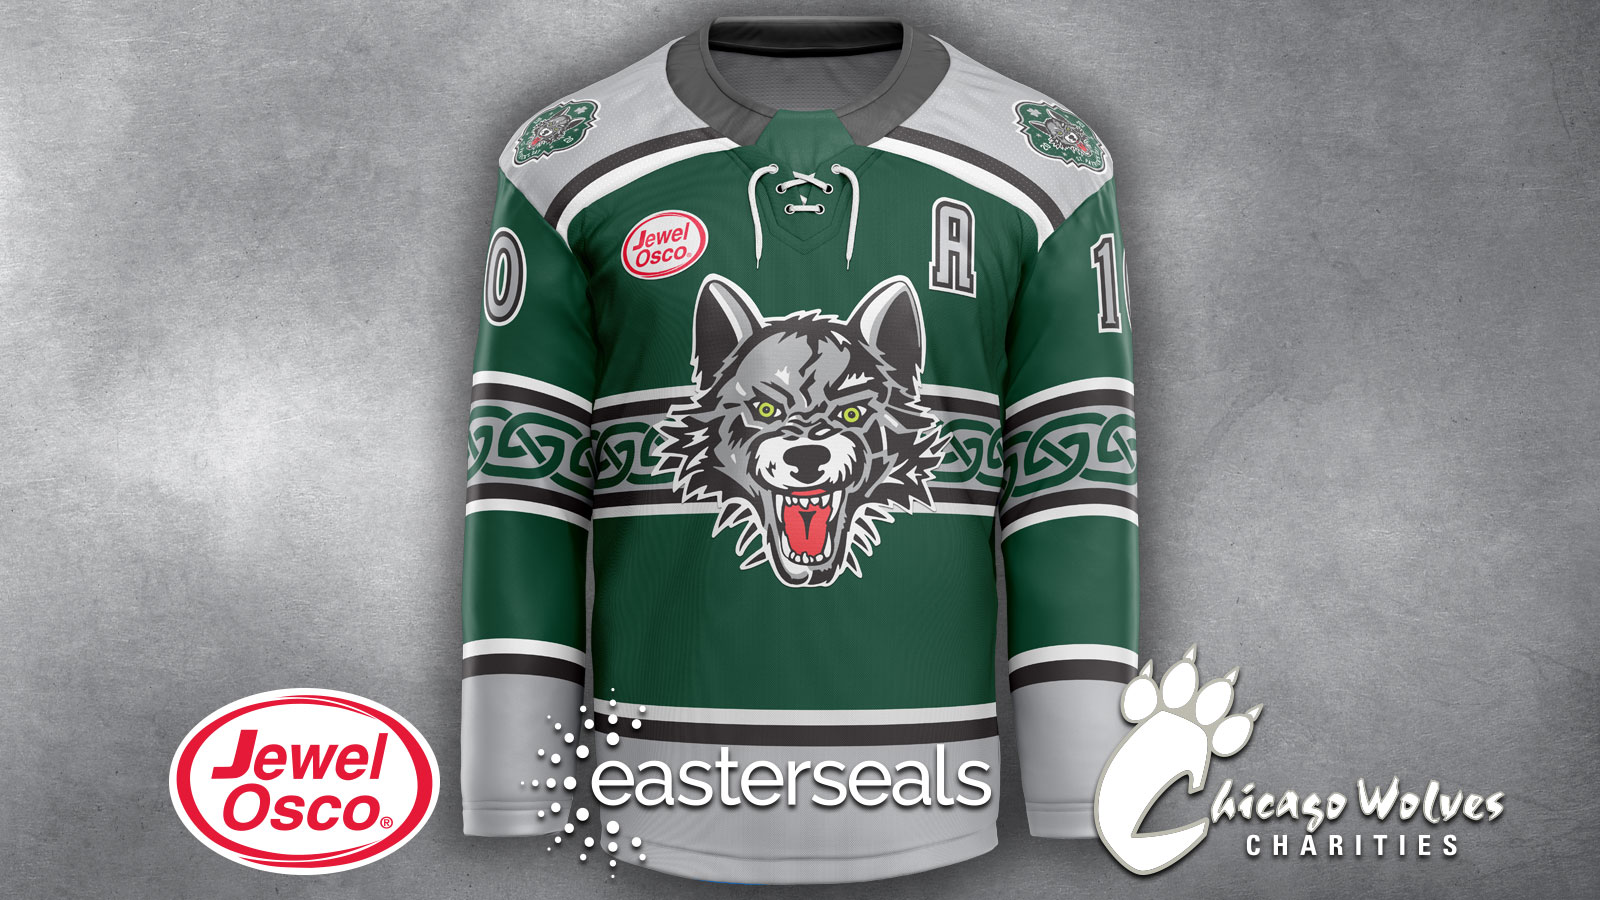 St. Patrick's Day jerseys for Easterseals